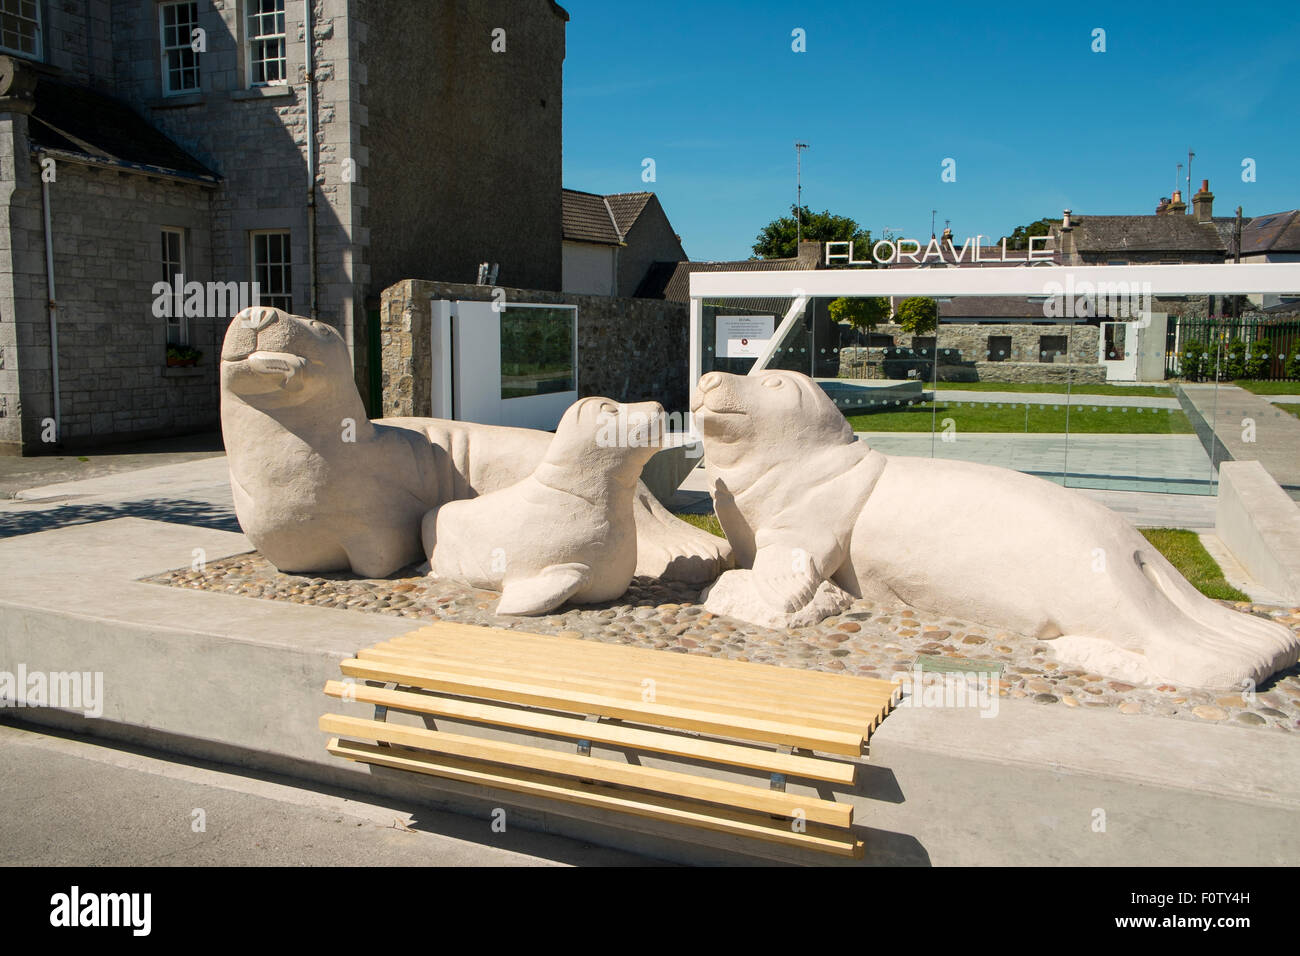 The three seals sculpture at the Floraville town park in Skerries, north county Dublin, Ireland by local artist Paul Darcy Stock Photo